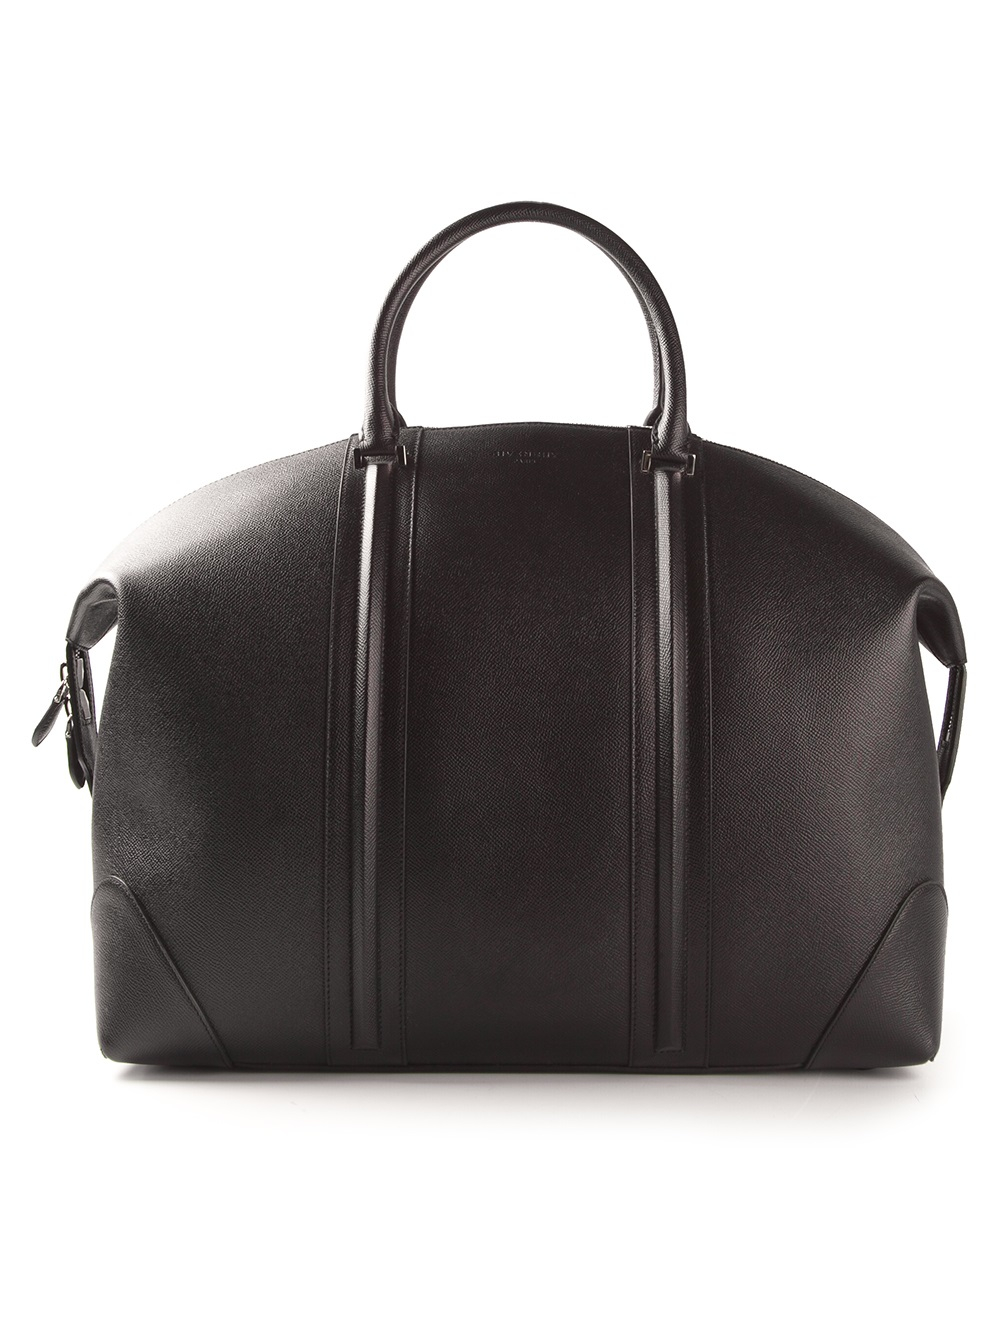 Lyst - Givenchy Luggage Bag in Black for Men